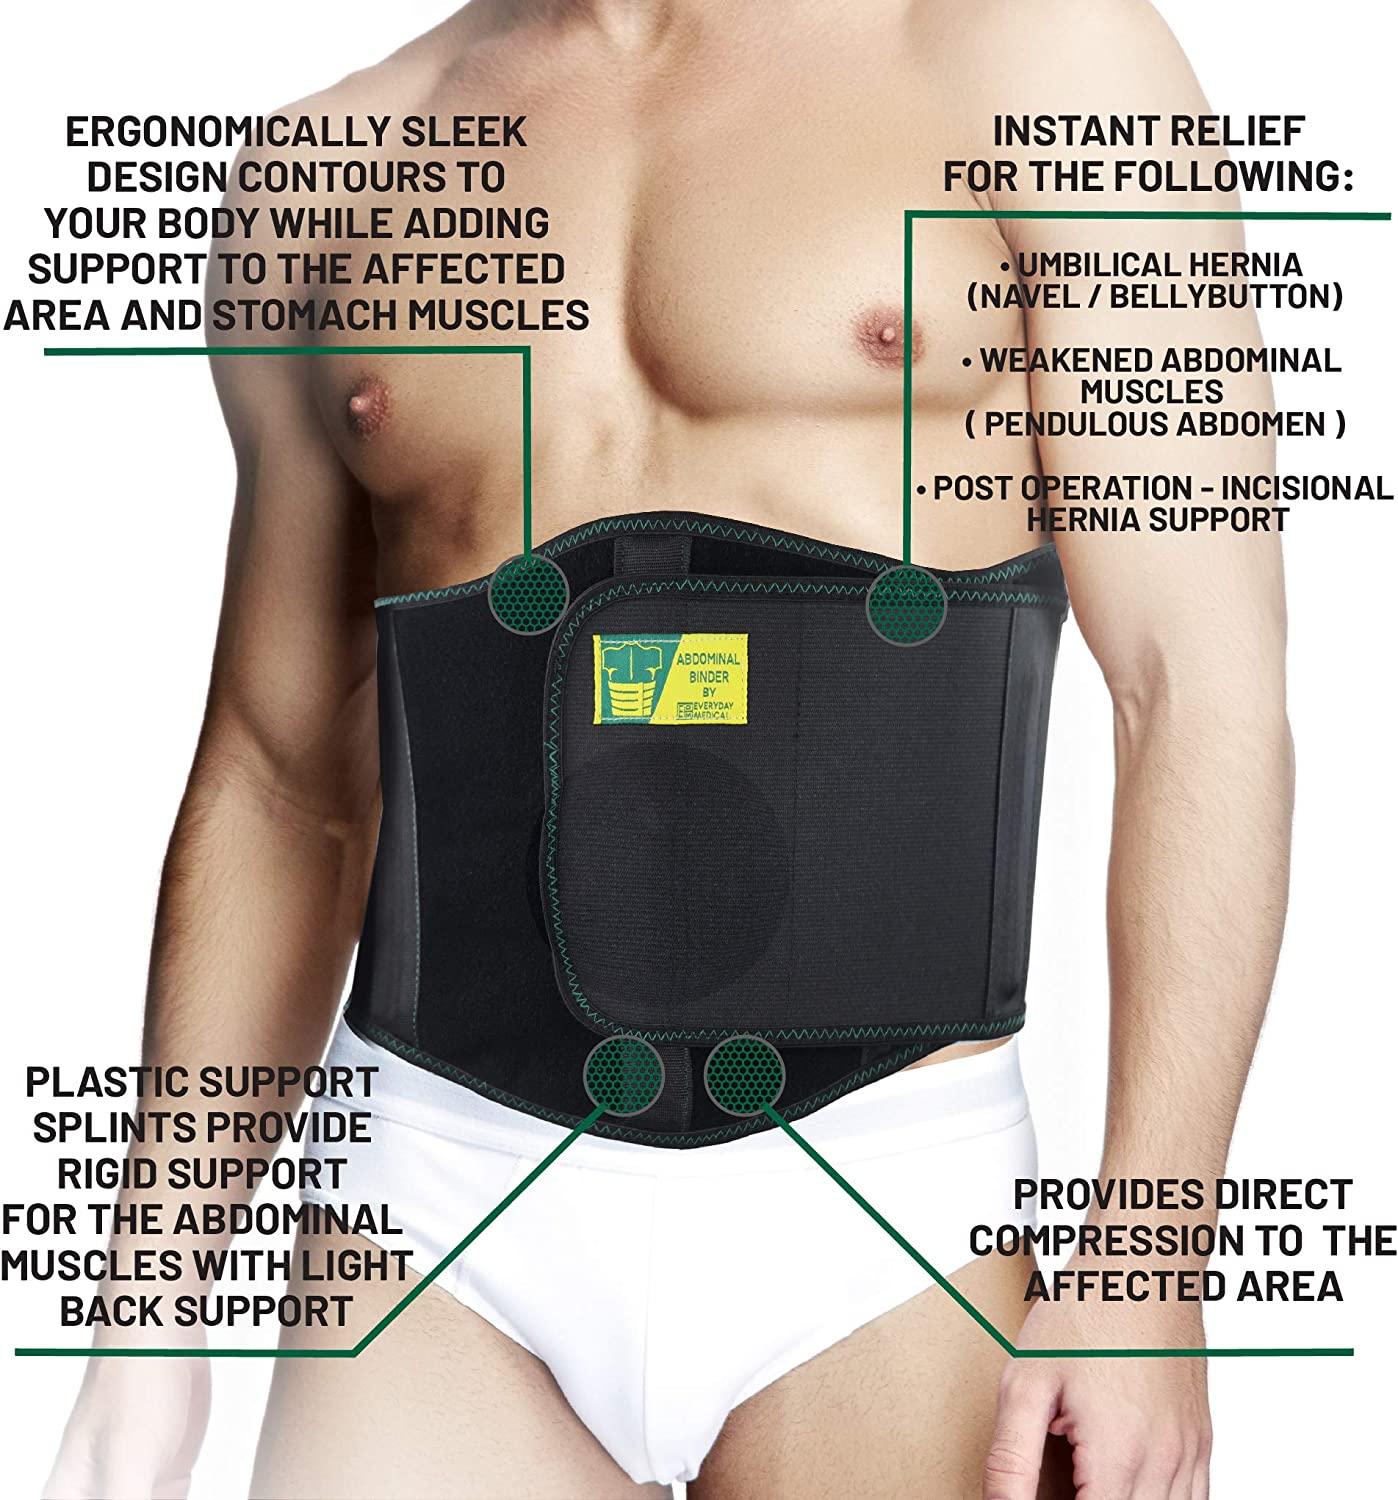 Ergonomic Umbilical Hernia Belt Abdominal Binder for Hernia Support  Umbilical Navel Hernia Strap with Compression Pad Ventral Hernia Support  for Men and Women - Standard (24-44 in)